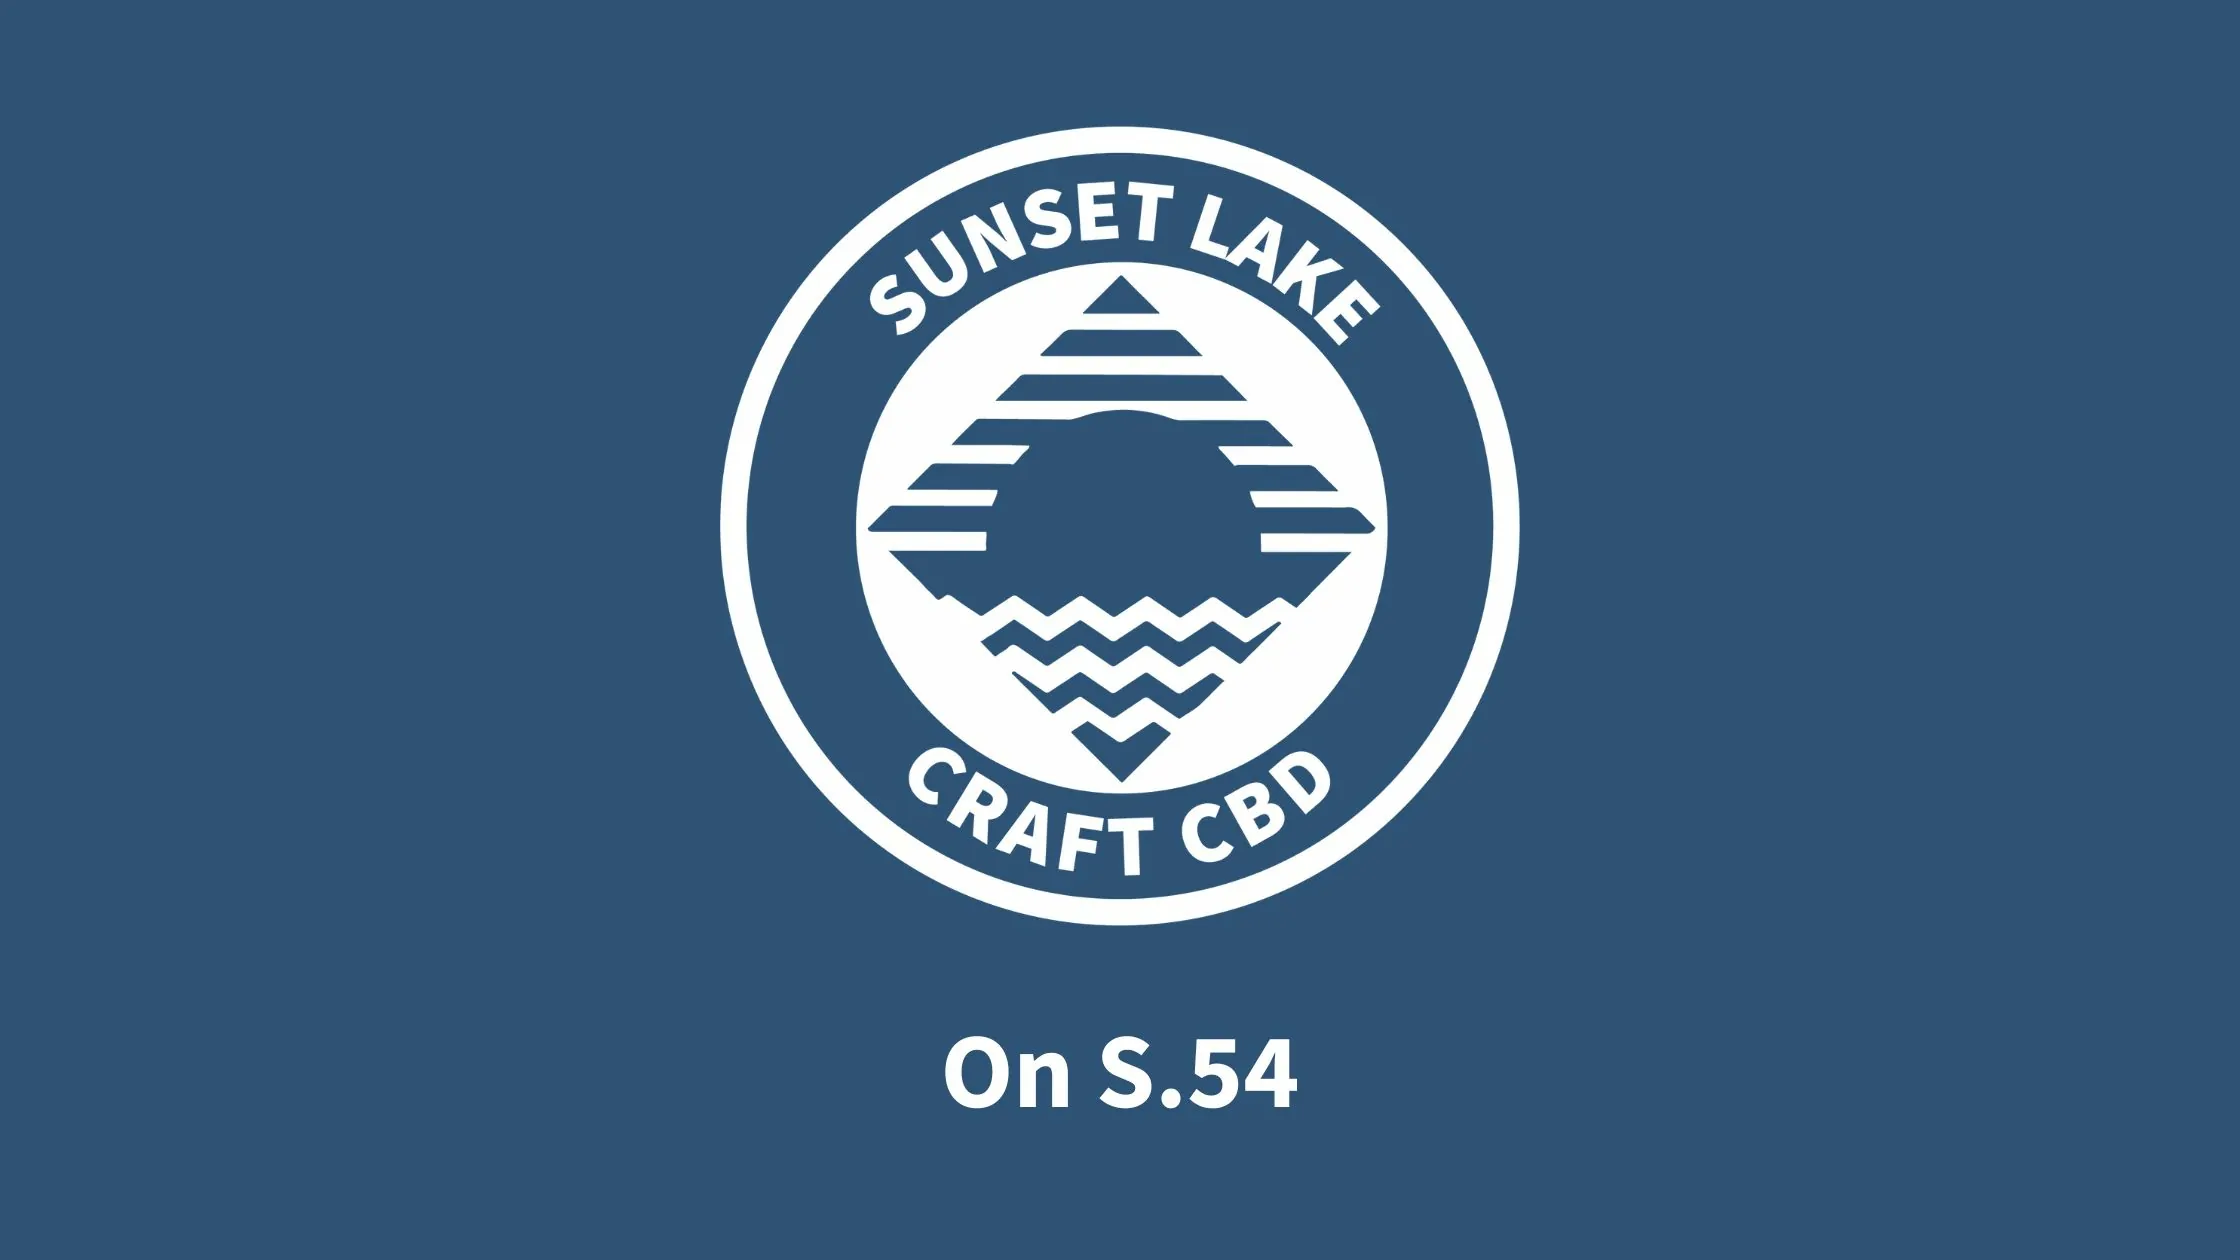 A blue banner with the Sunset Lake CBD logo. Text reads "On S.54" (A Vermont bill regarding cannabis)